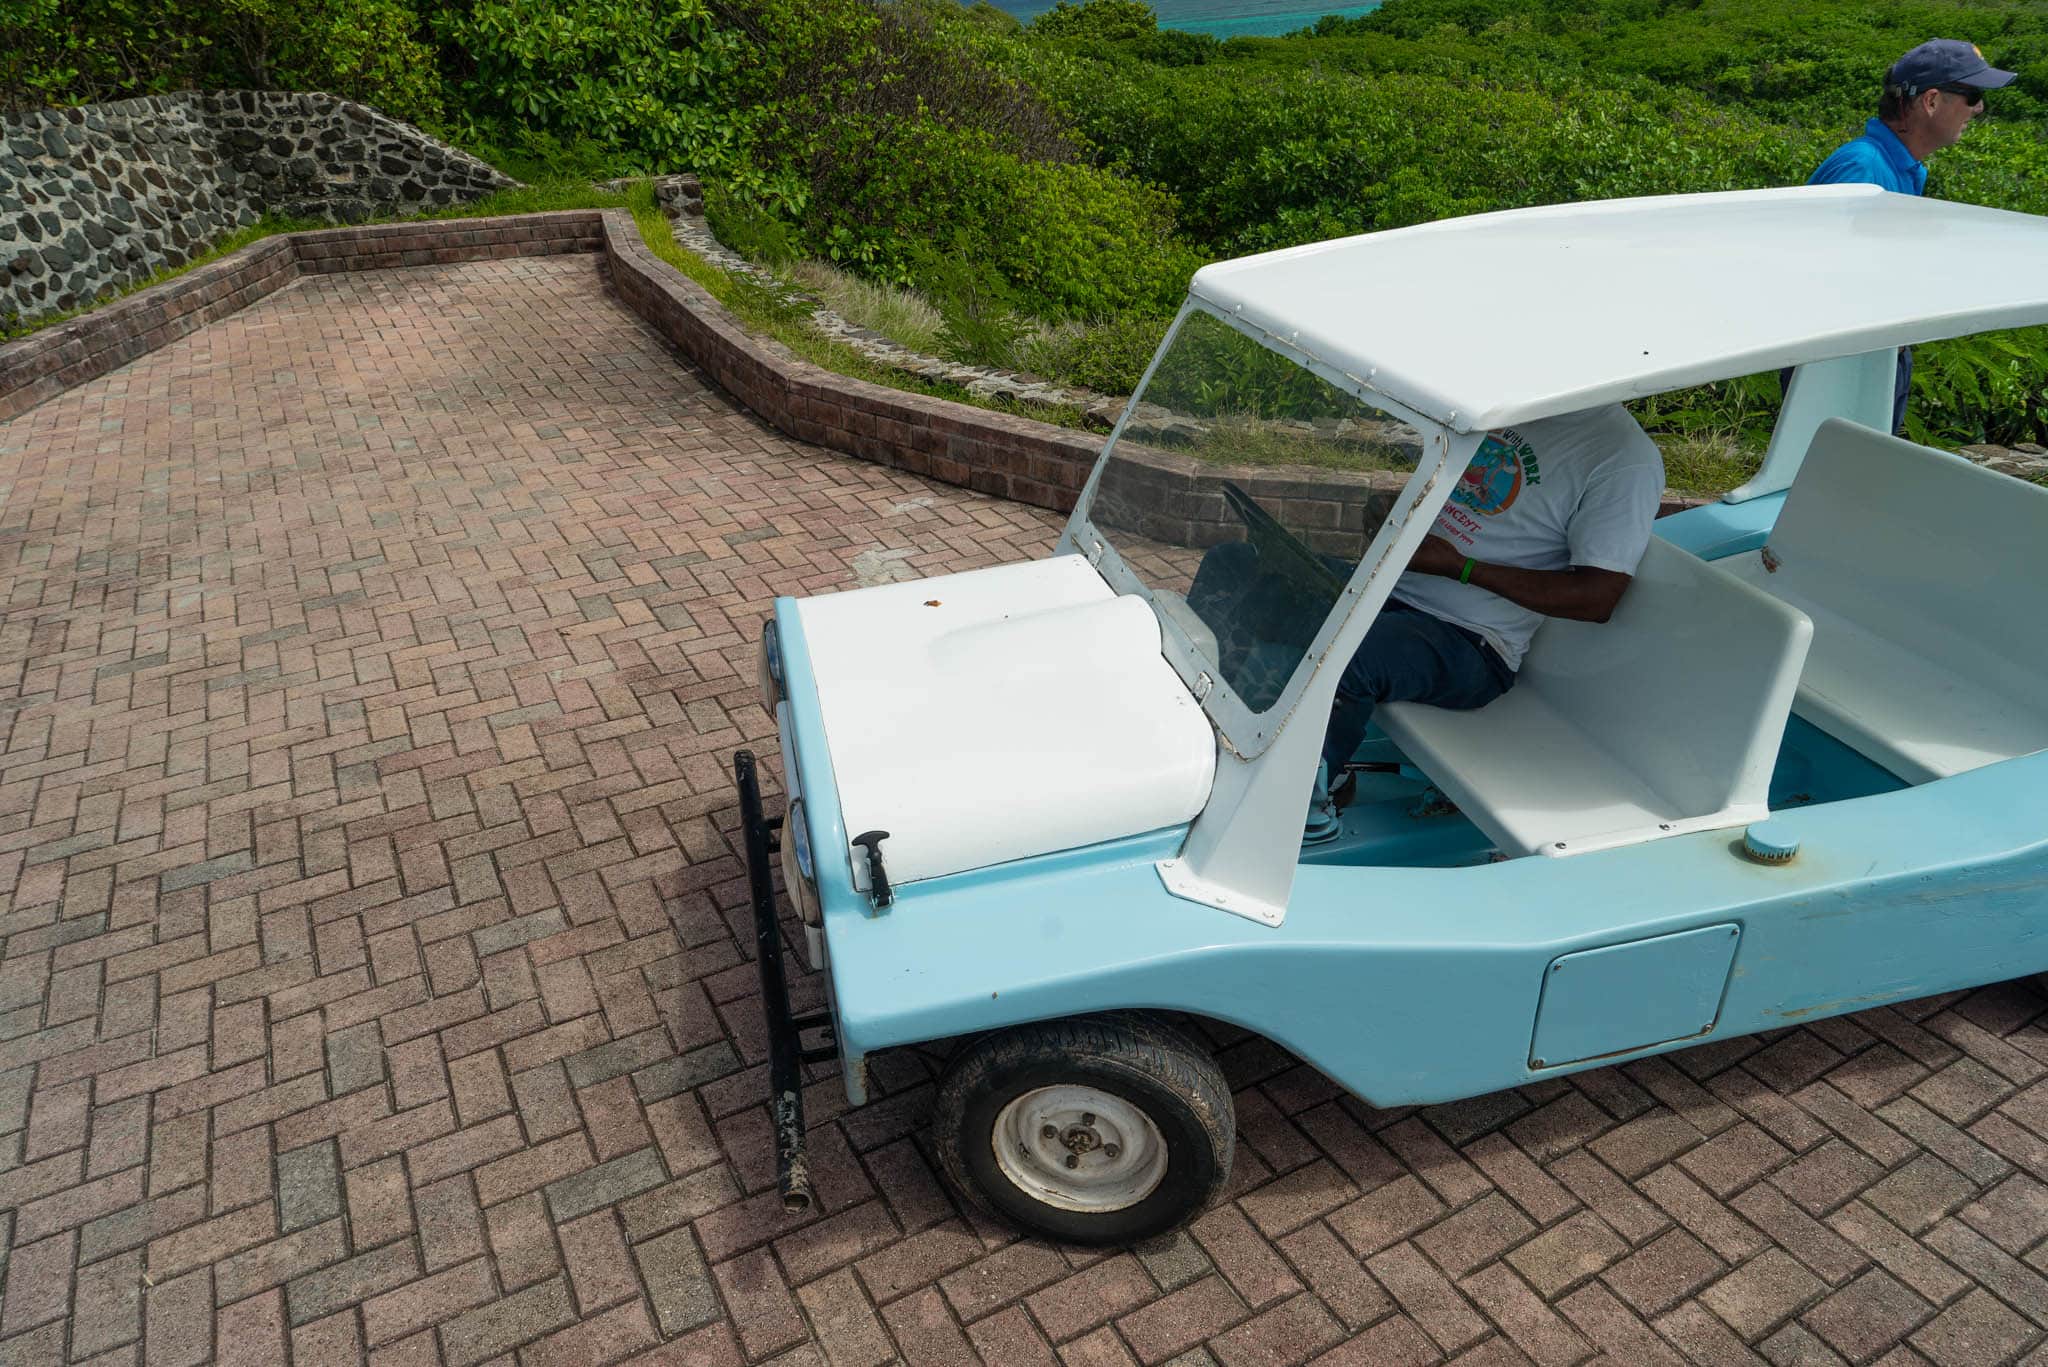 How do you get around your private island? By vintage Mini Moke, of course!